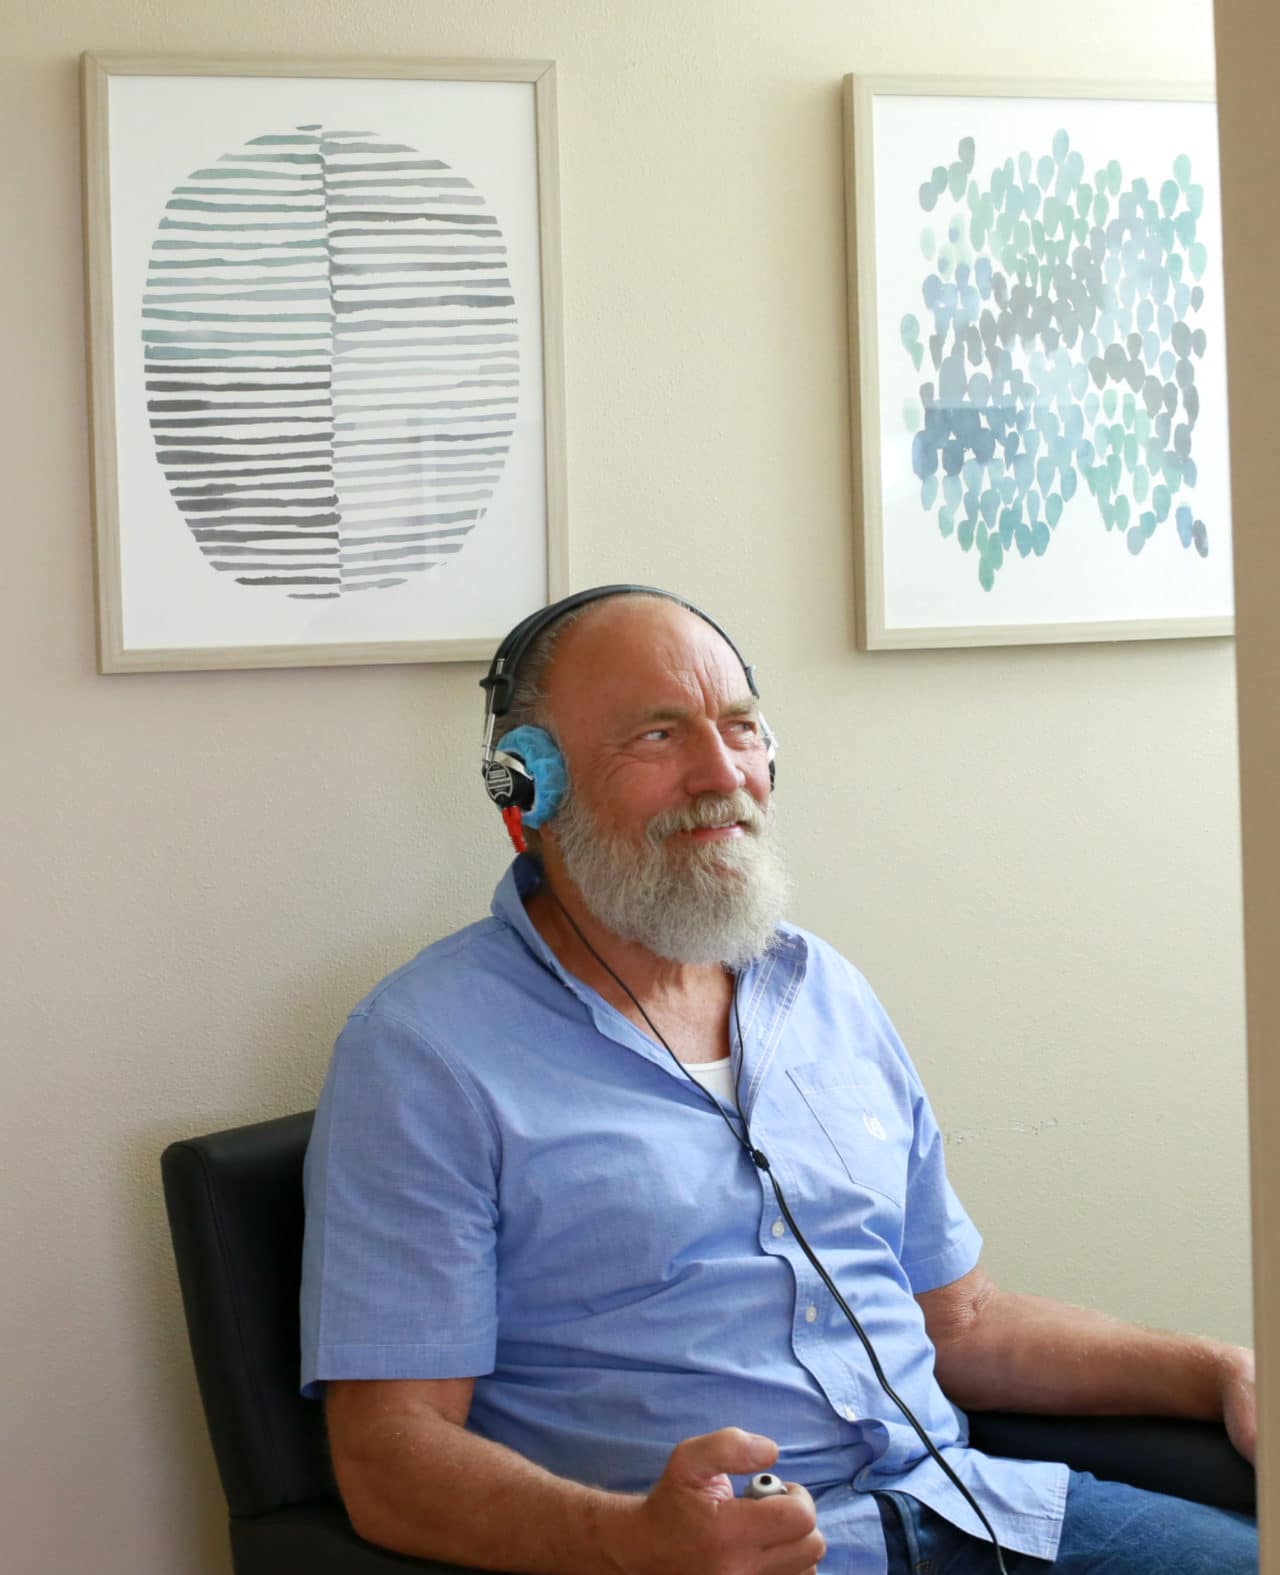 A patient wearing headphones and holding an audiometry button device